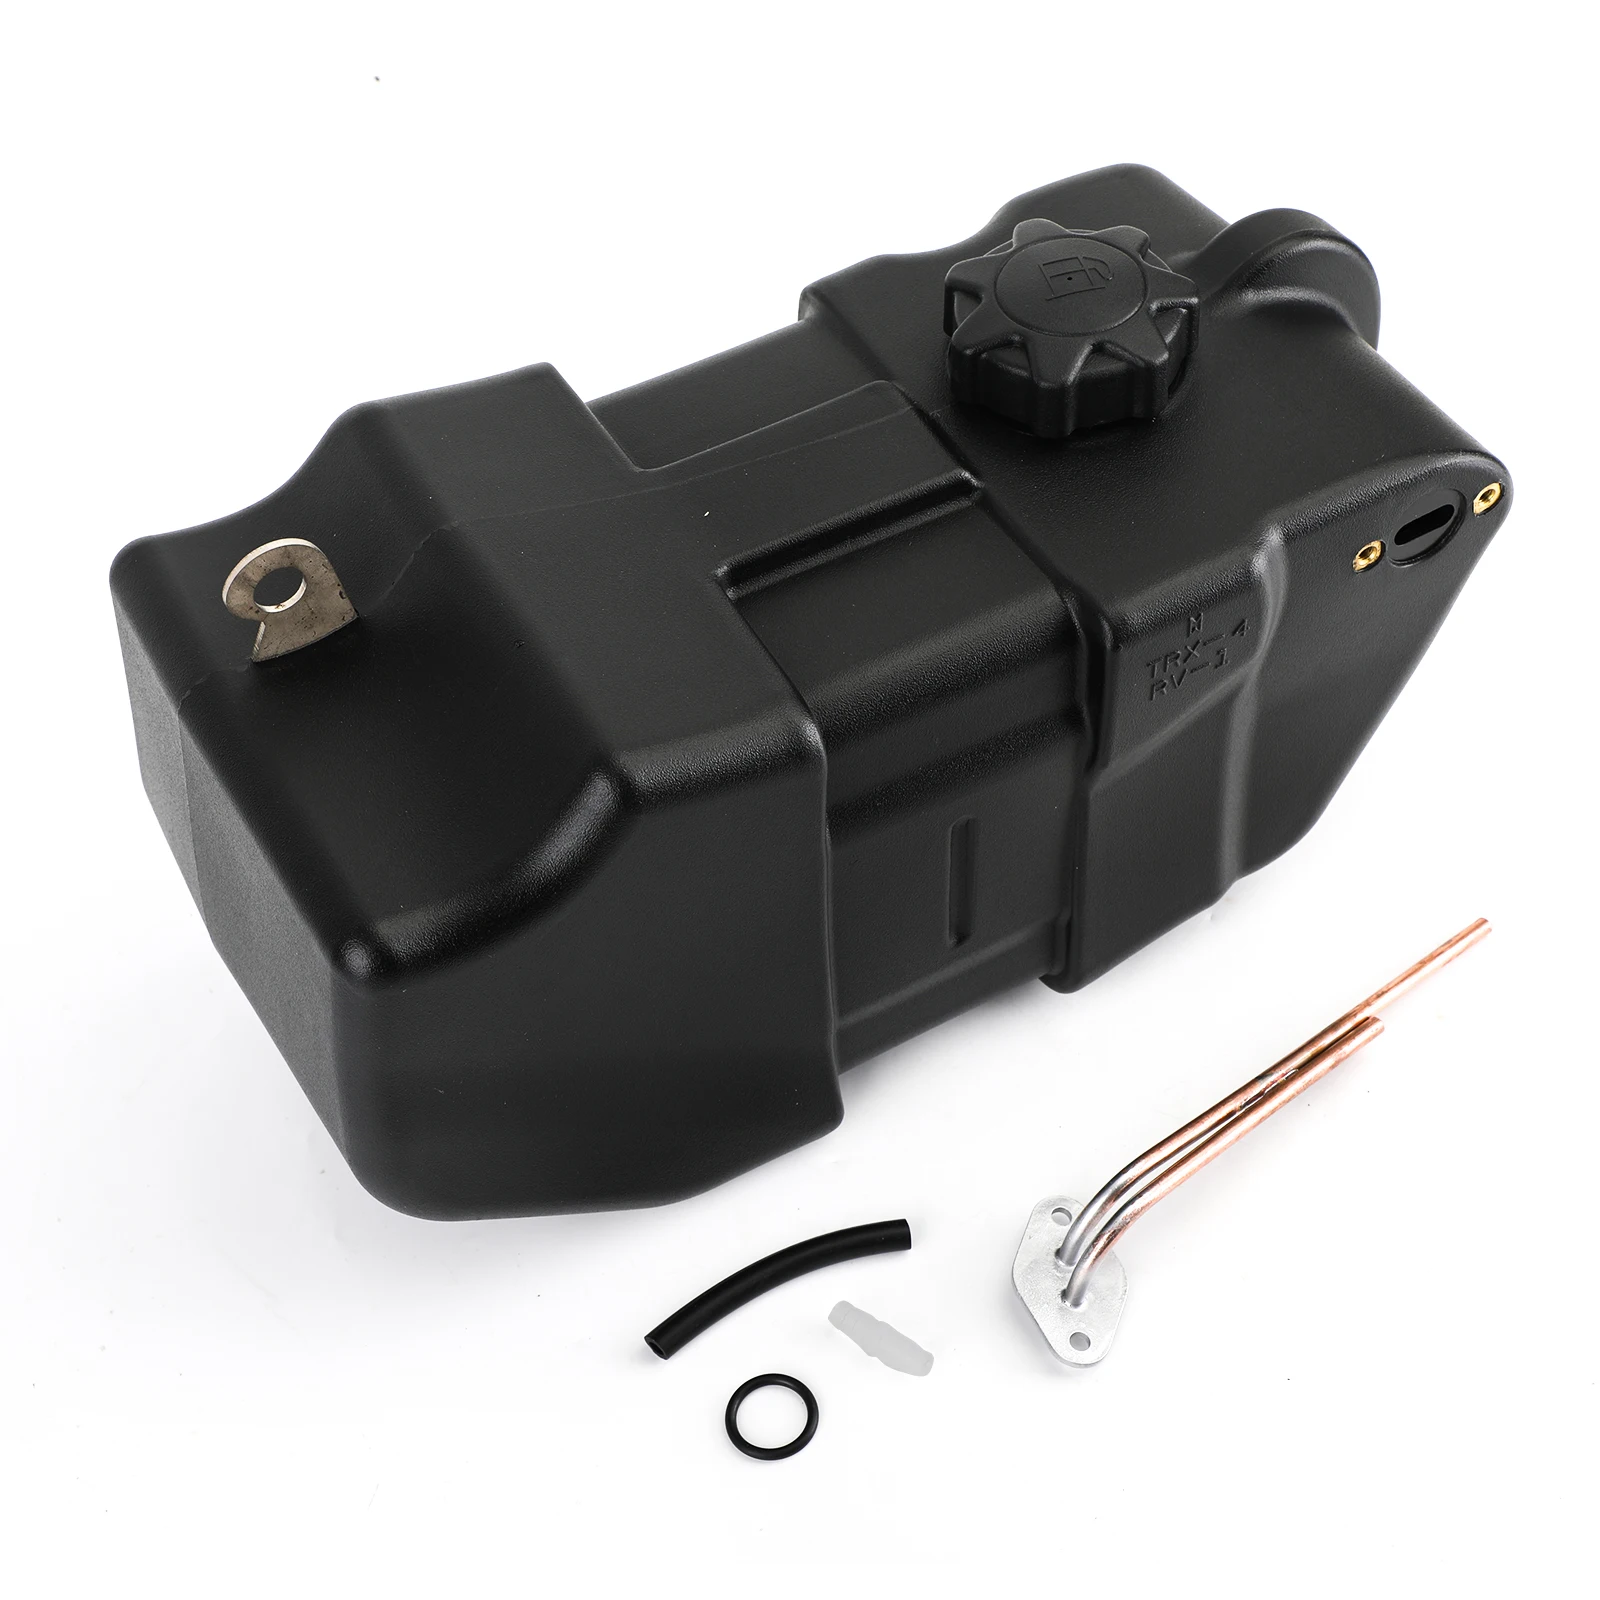 

Areyourshop Plastic Fuel Tank with cover For Honda ATV TRX 350D 350 Fourtrax Foreman 86 87 88 1989